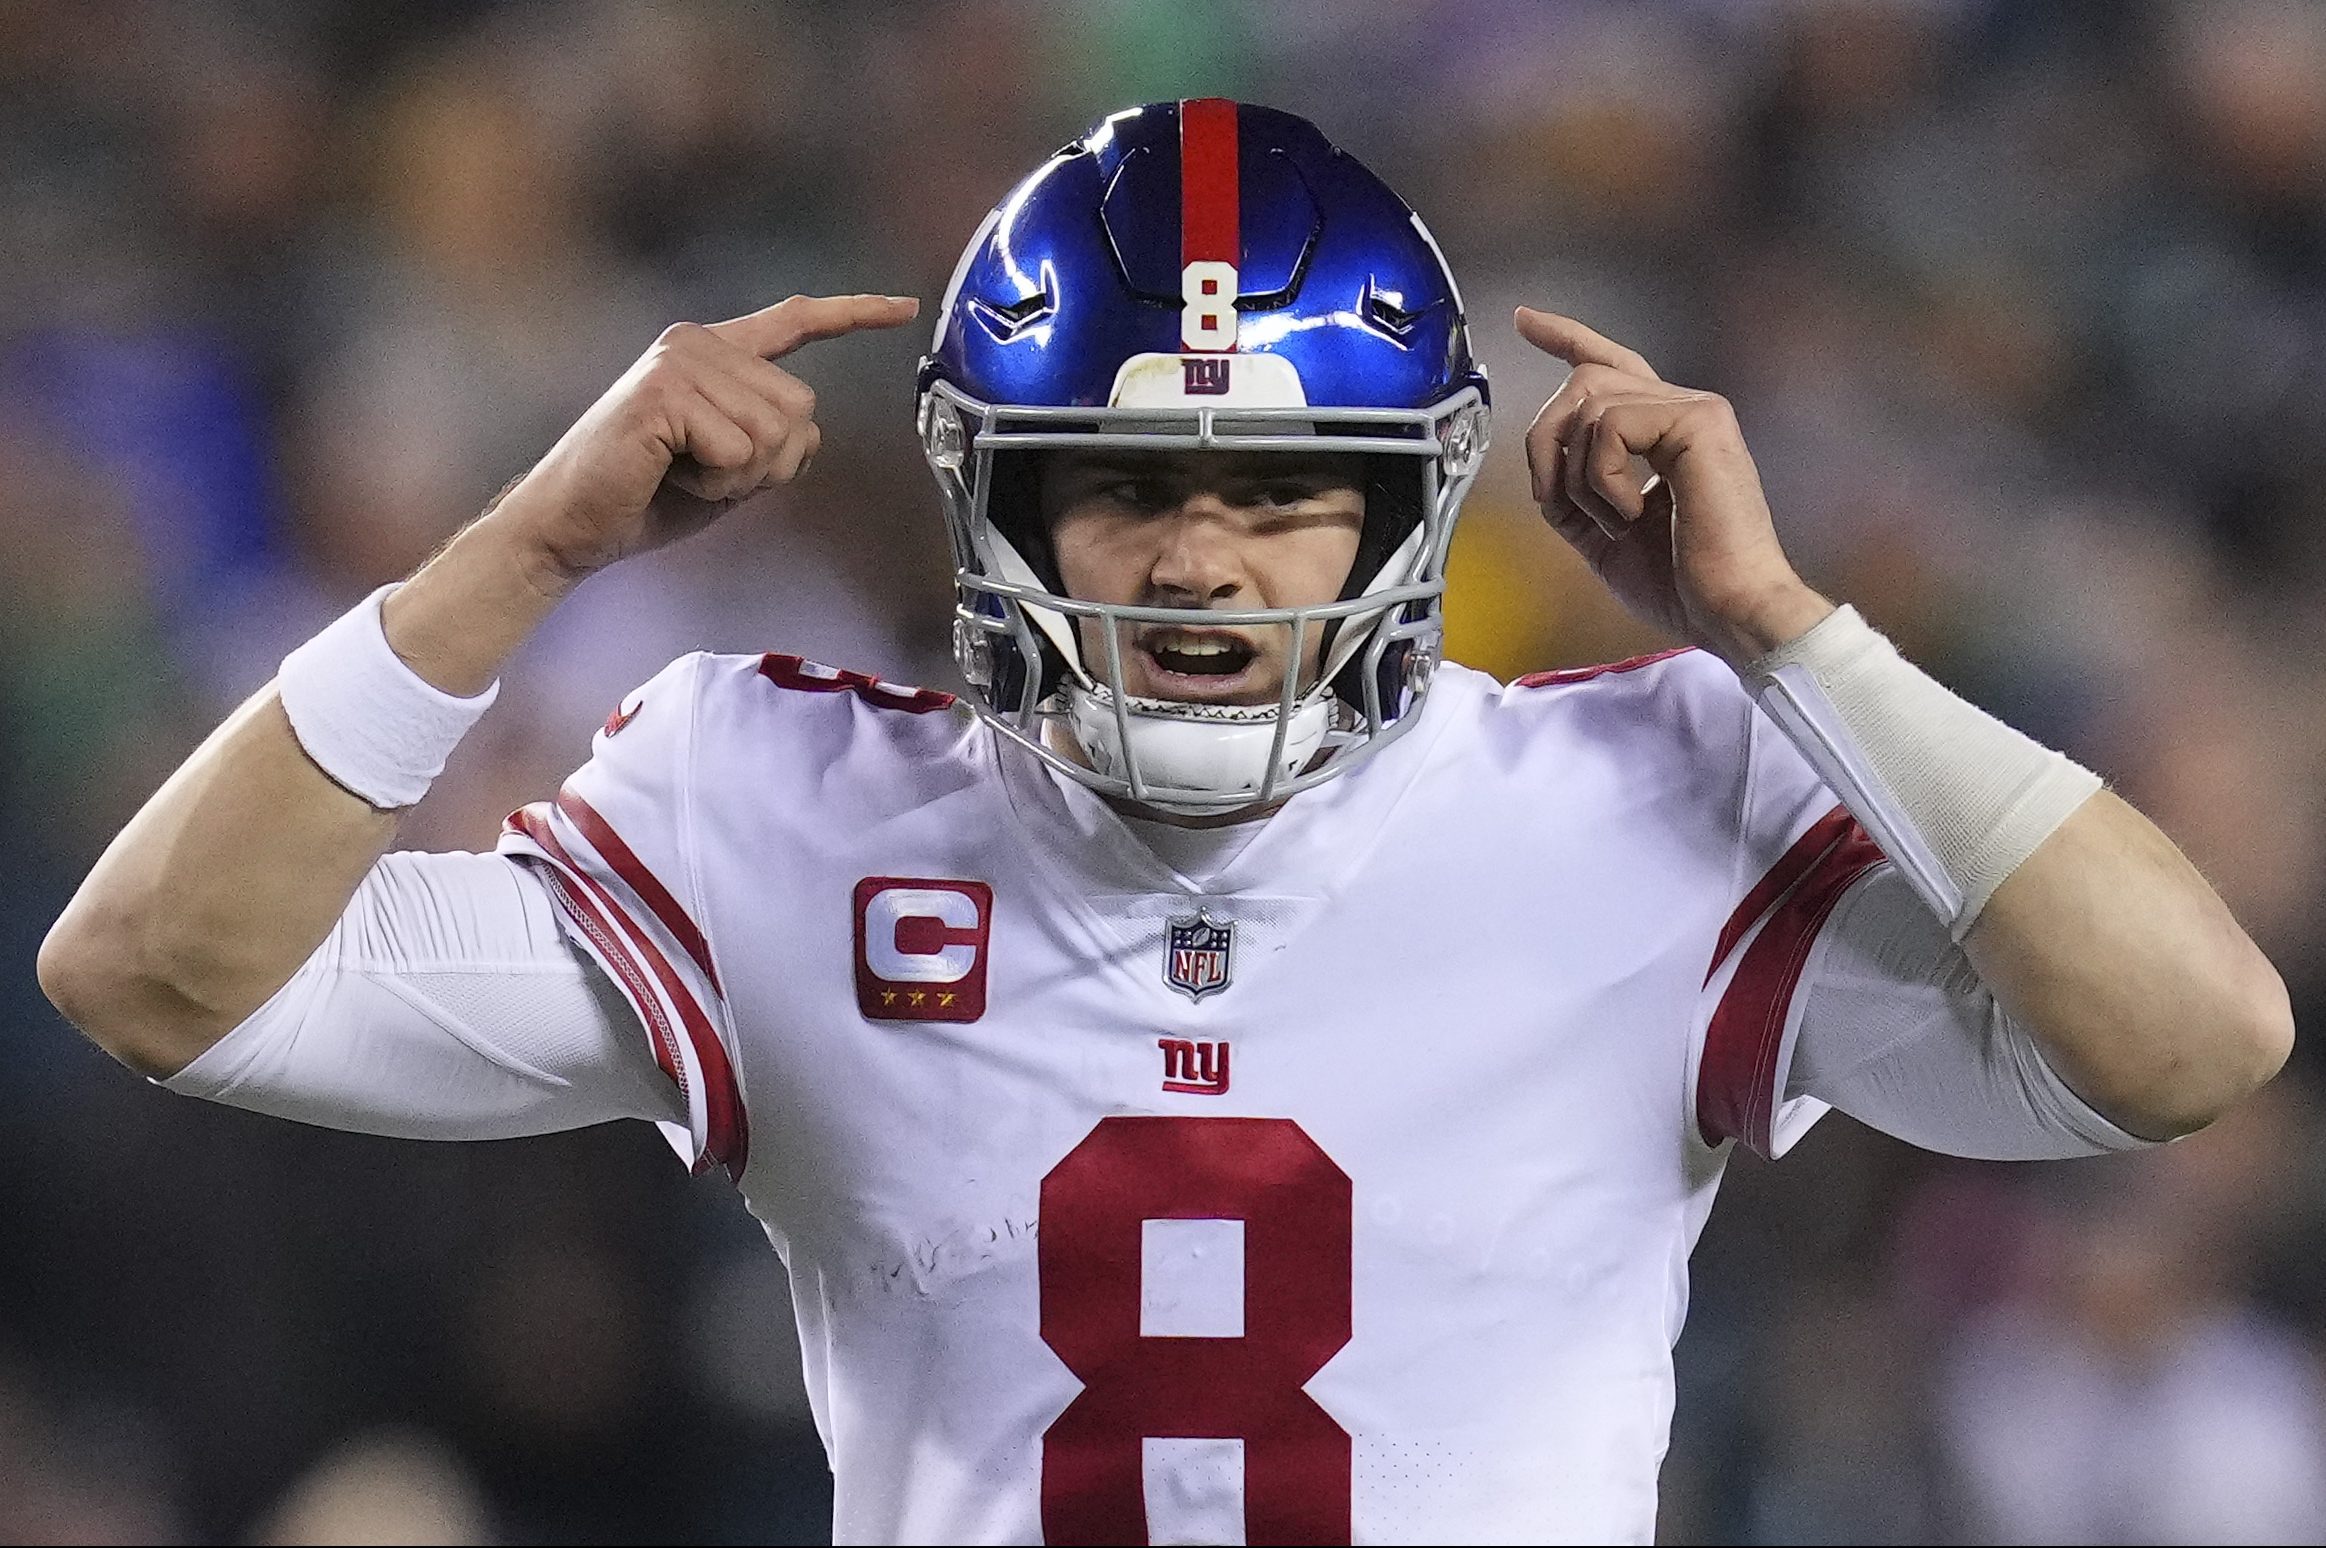 This photo of Eli Manning and Daniel Jones proves they're the same person 